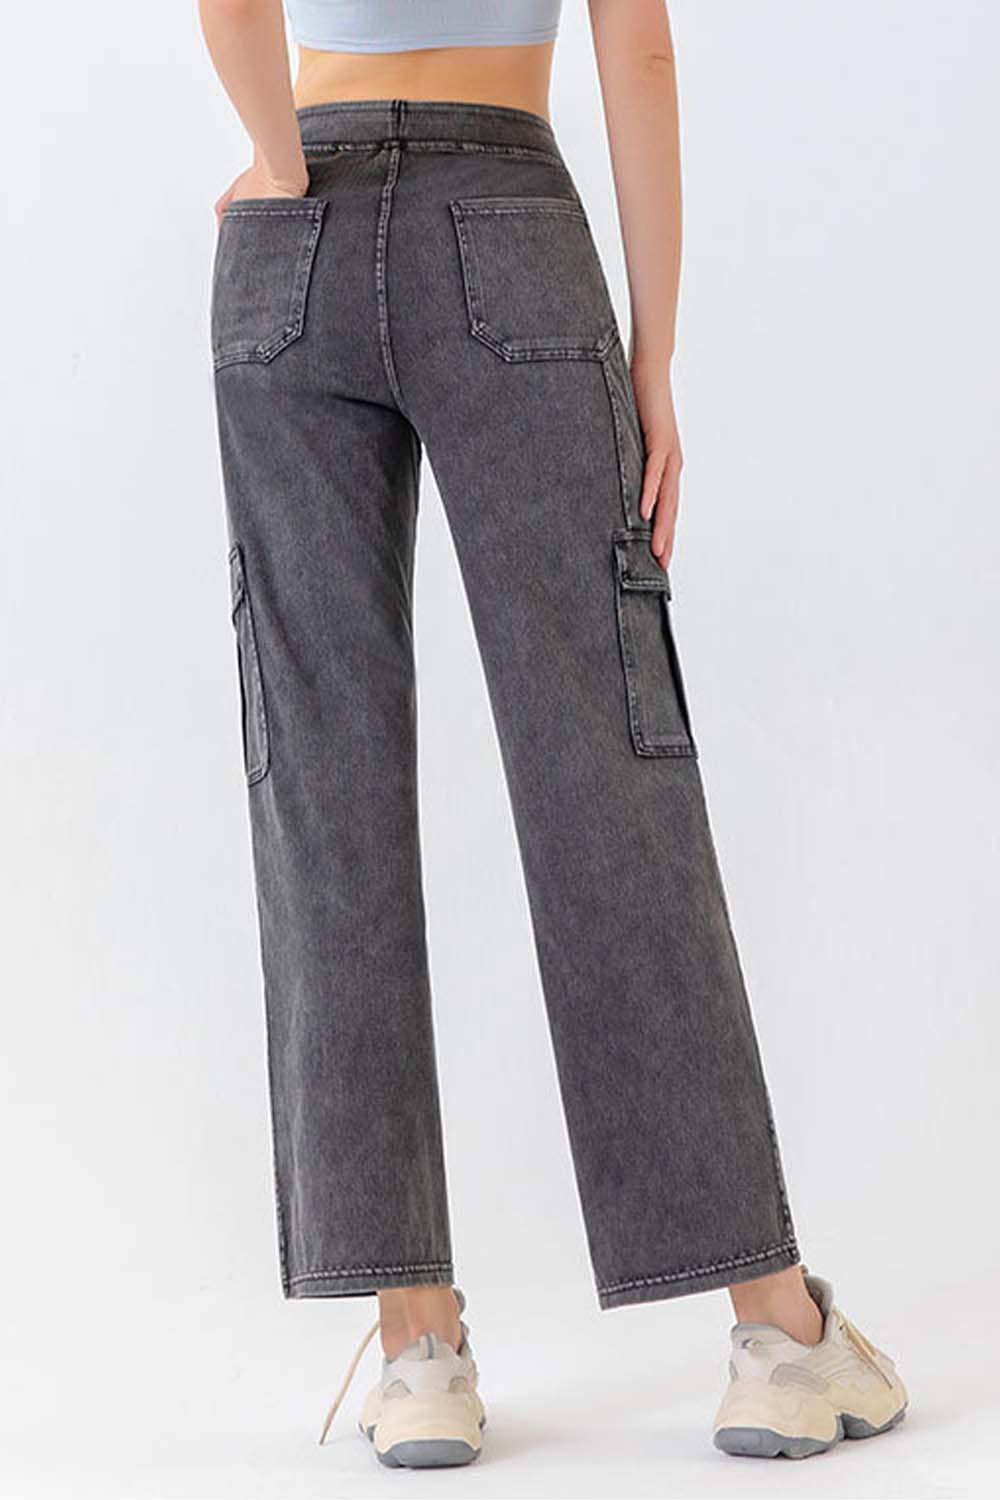 Dark Slate Gray Button Fly Pocketed Long Jeans Sentient Beauty Fashions Apparel & Accessories